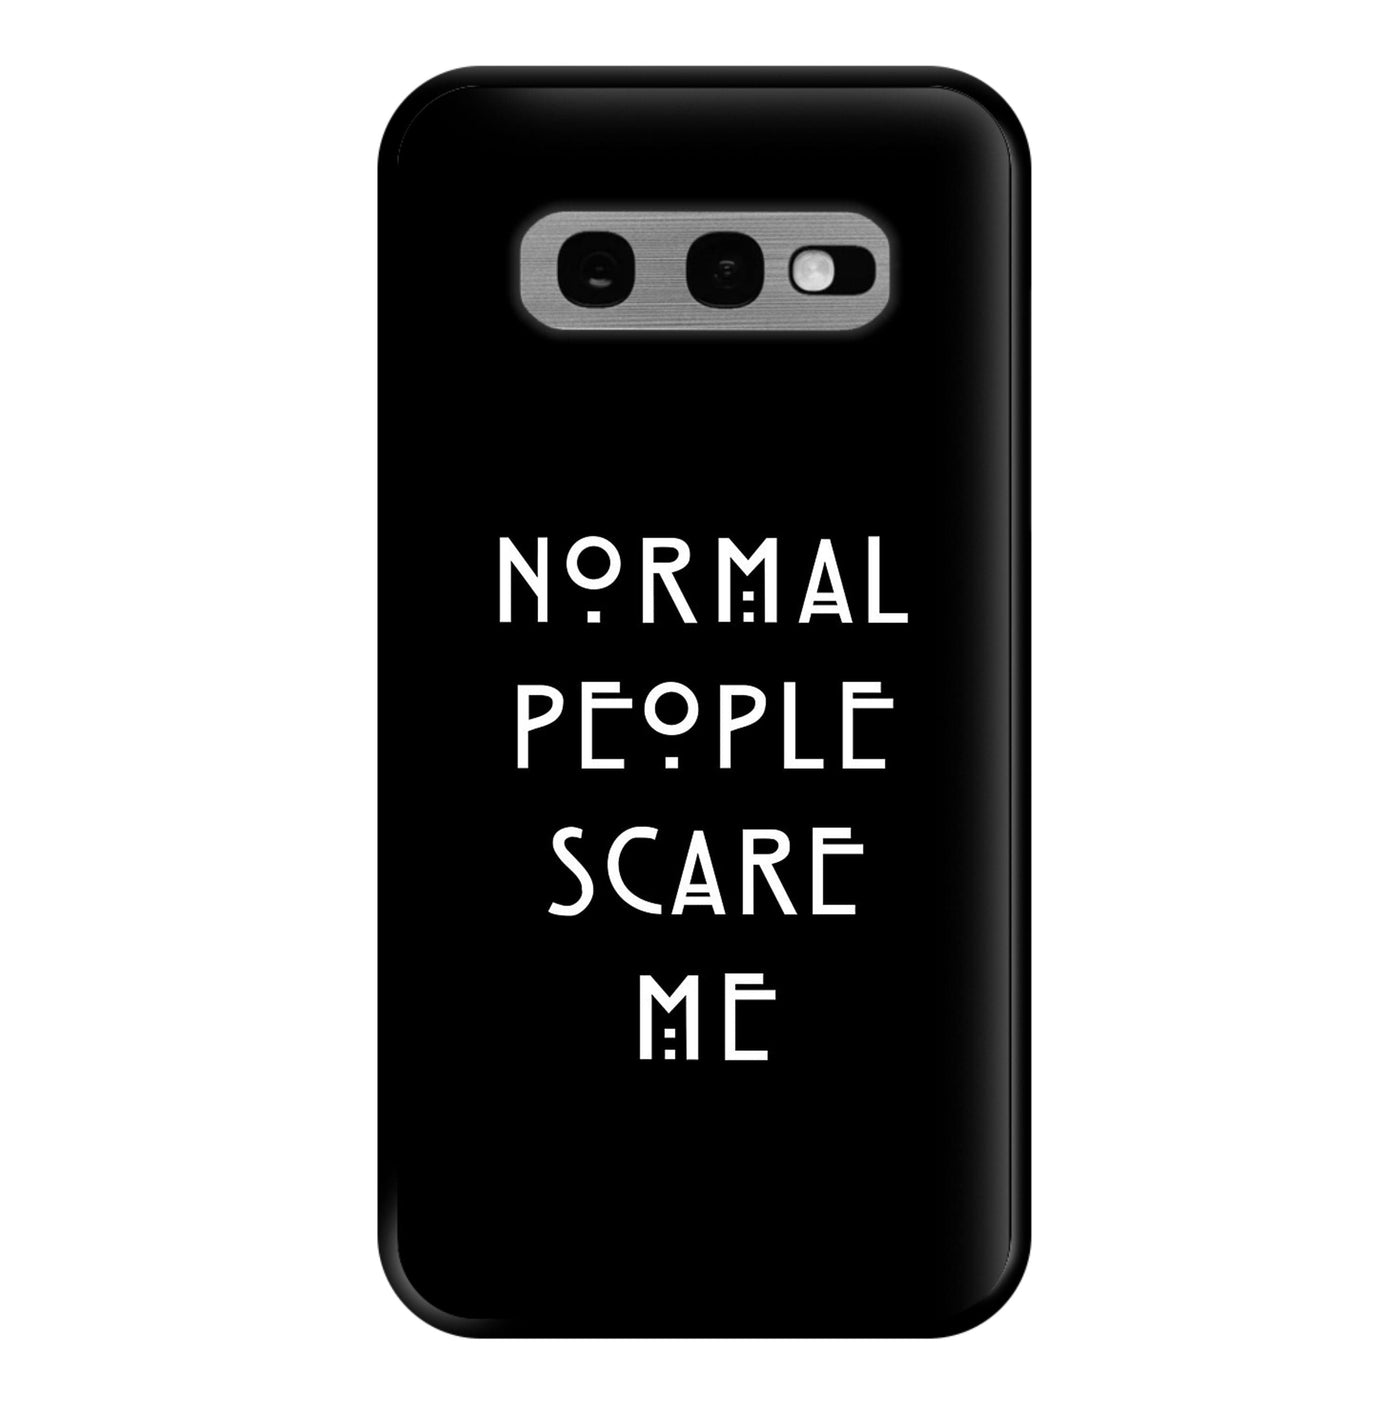 Normal People Scare Me - Black American Horror Story Phone Case